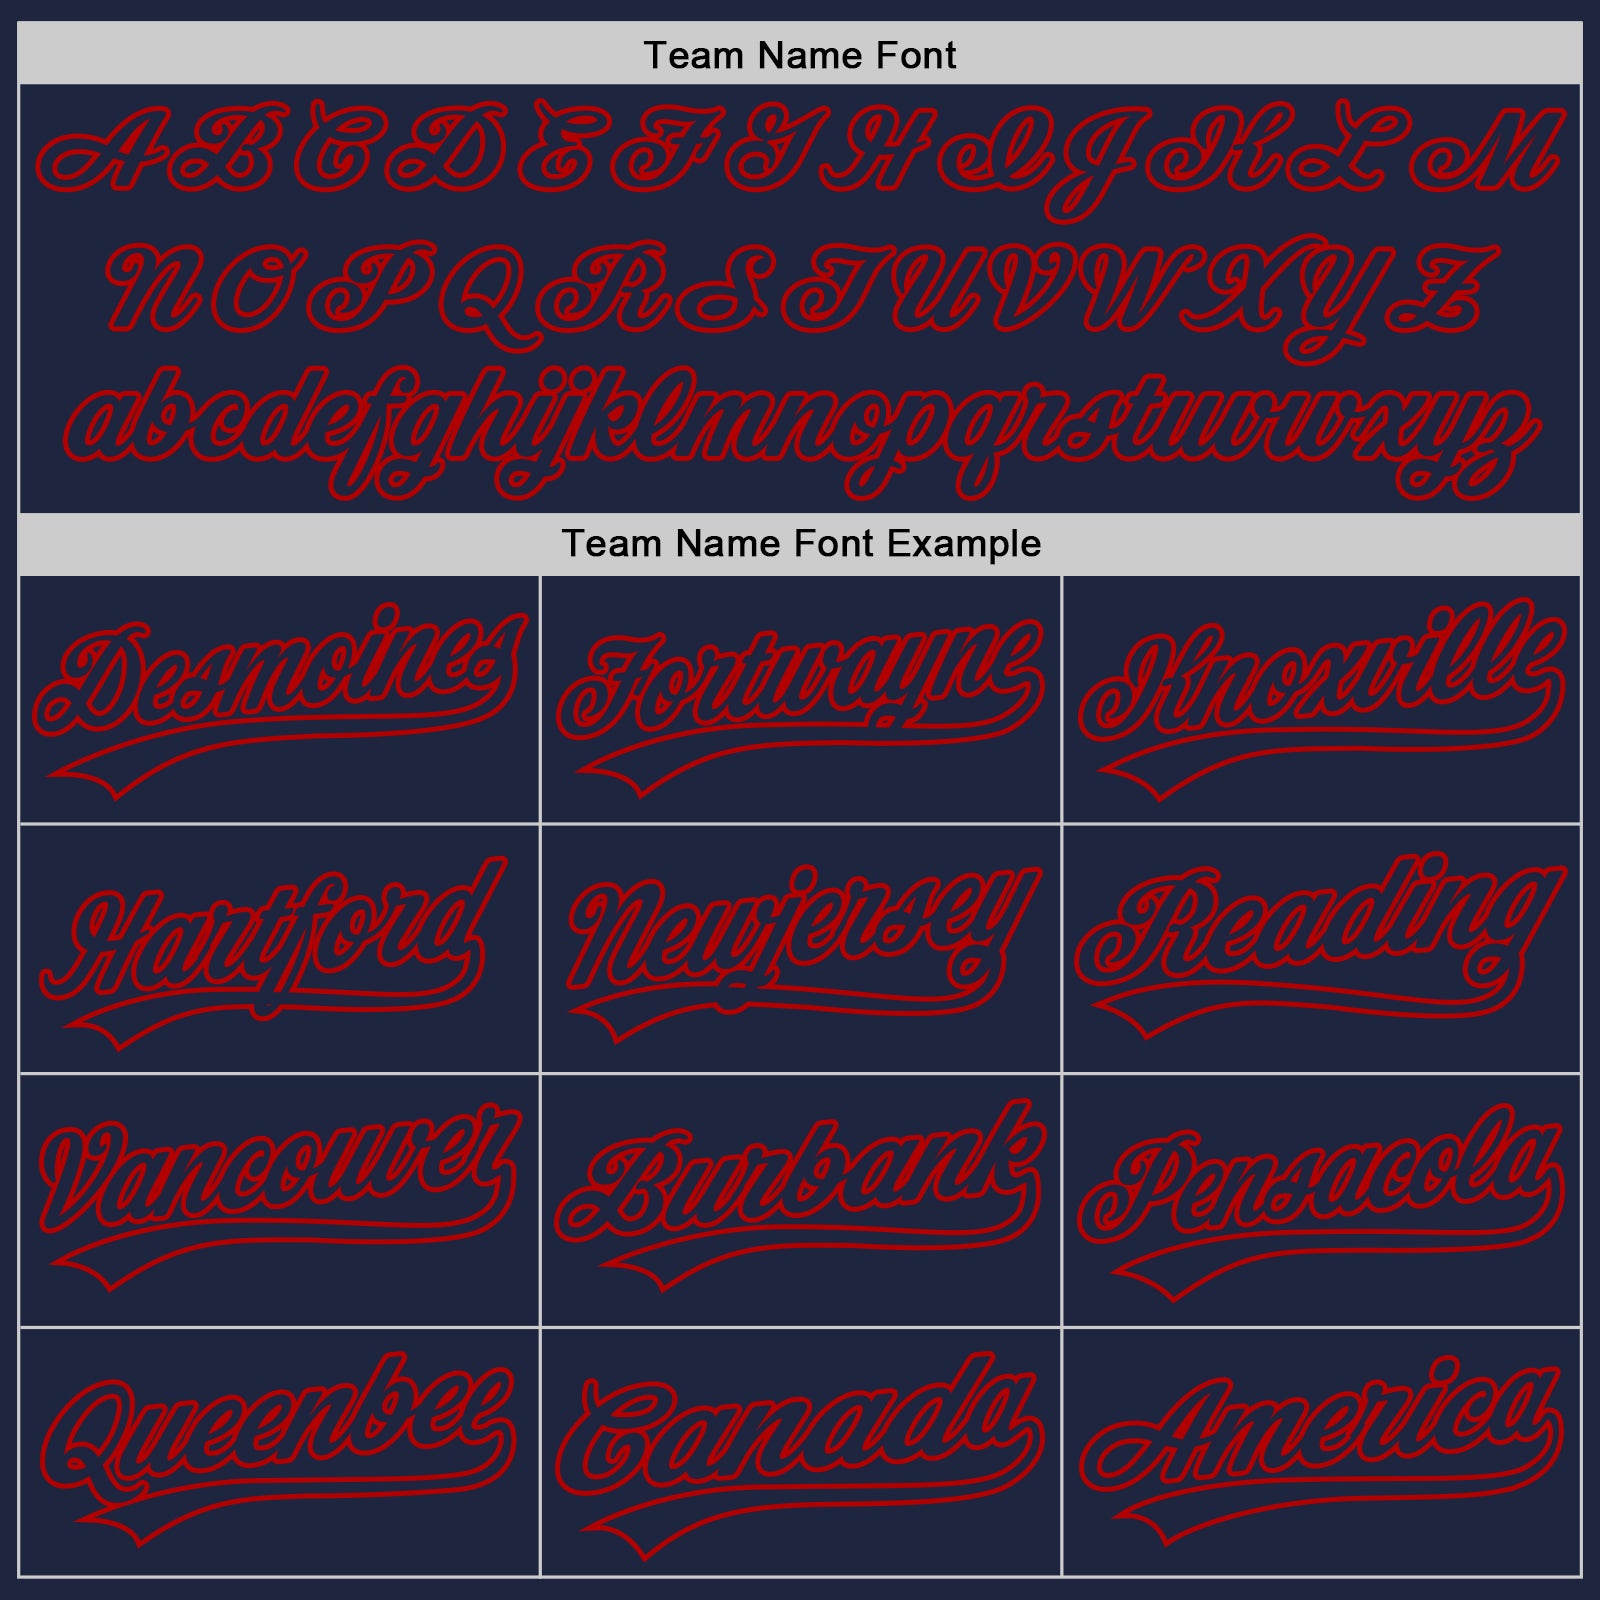 Custom Navy Red 3D Pattern Design Abstract Network Authentic Baseball Jersey